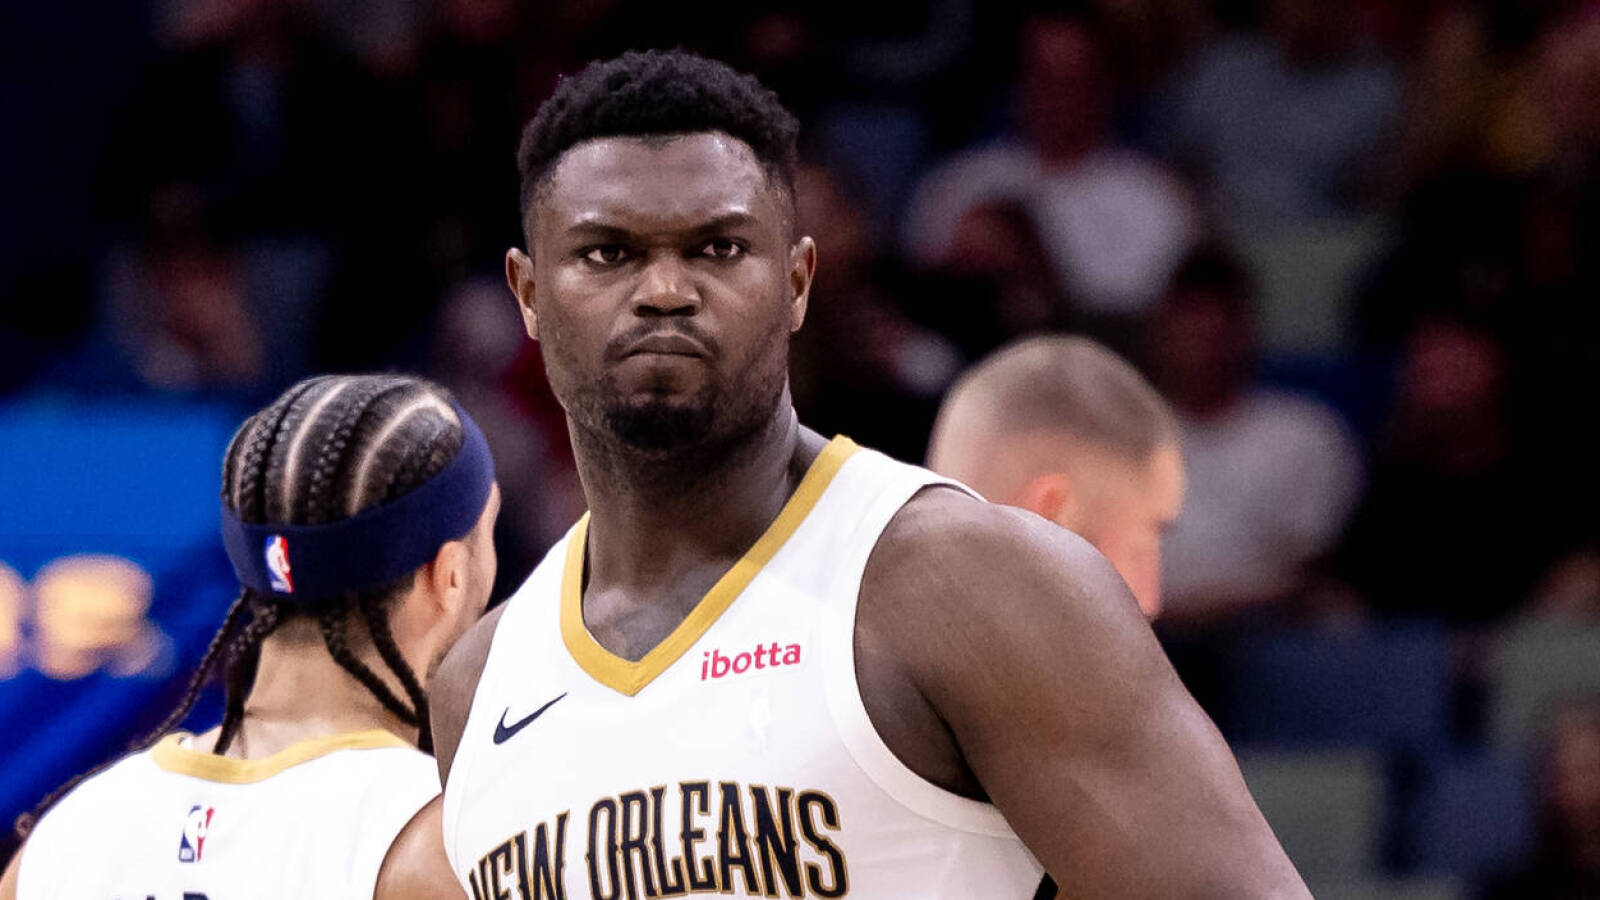 Zion Williamson defends Kevin Love after Pelicans-Heat brawl